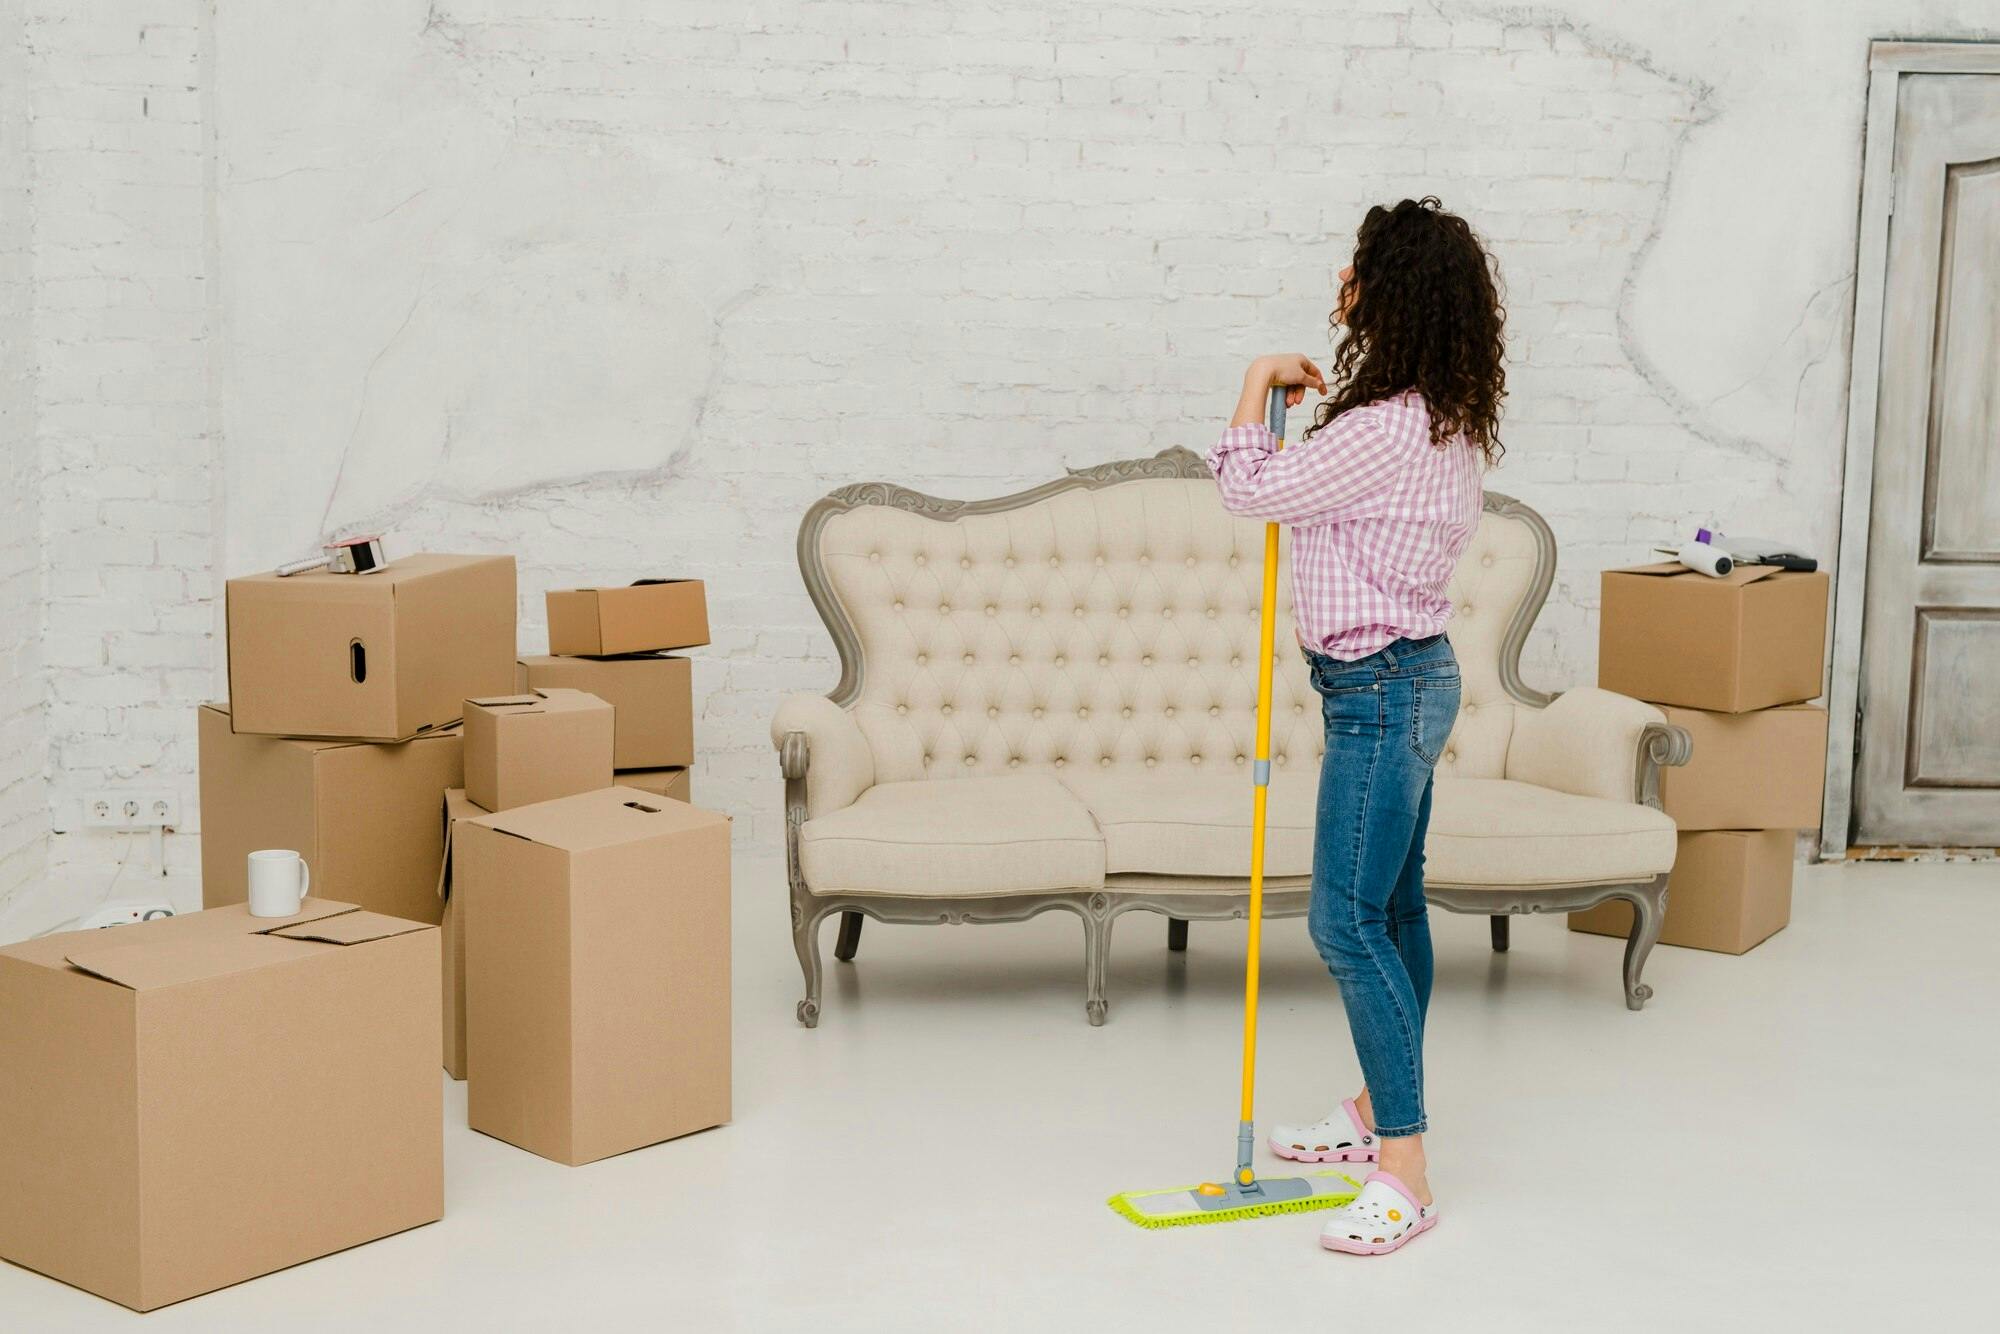 Exceptional End of Lease Cleaning in Canberra: Ensure a Stress-Free Move and Get Your Full Bond Back